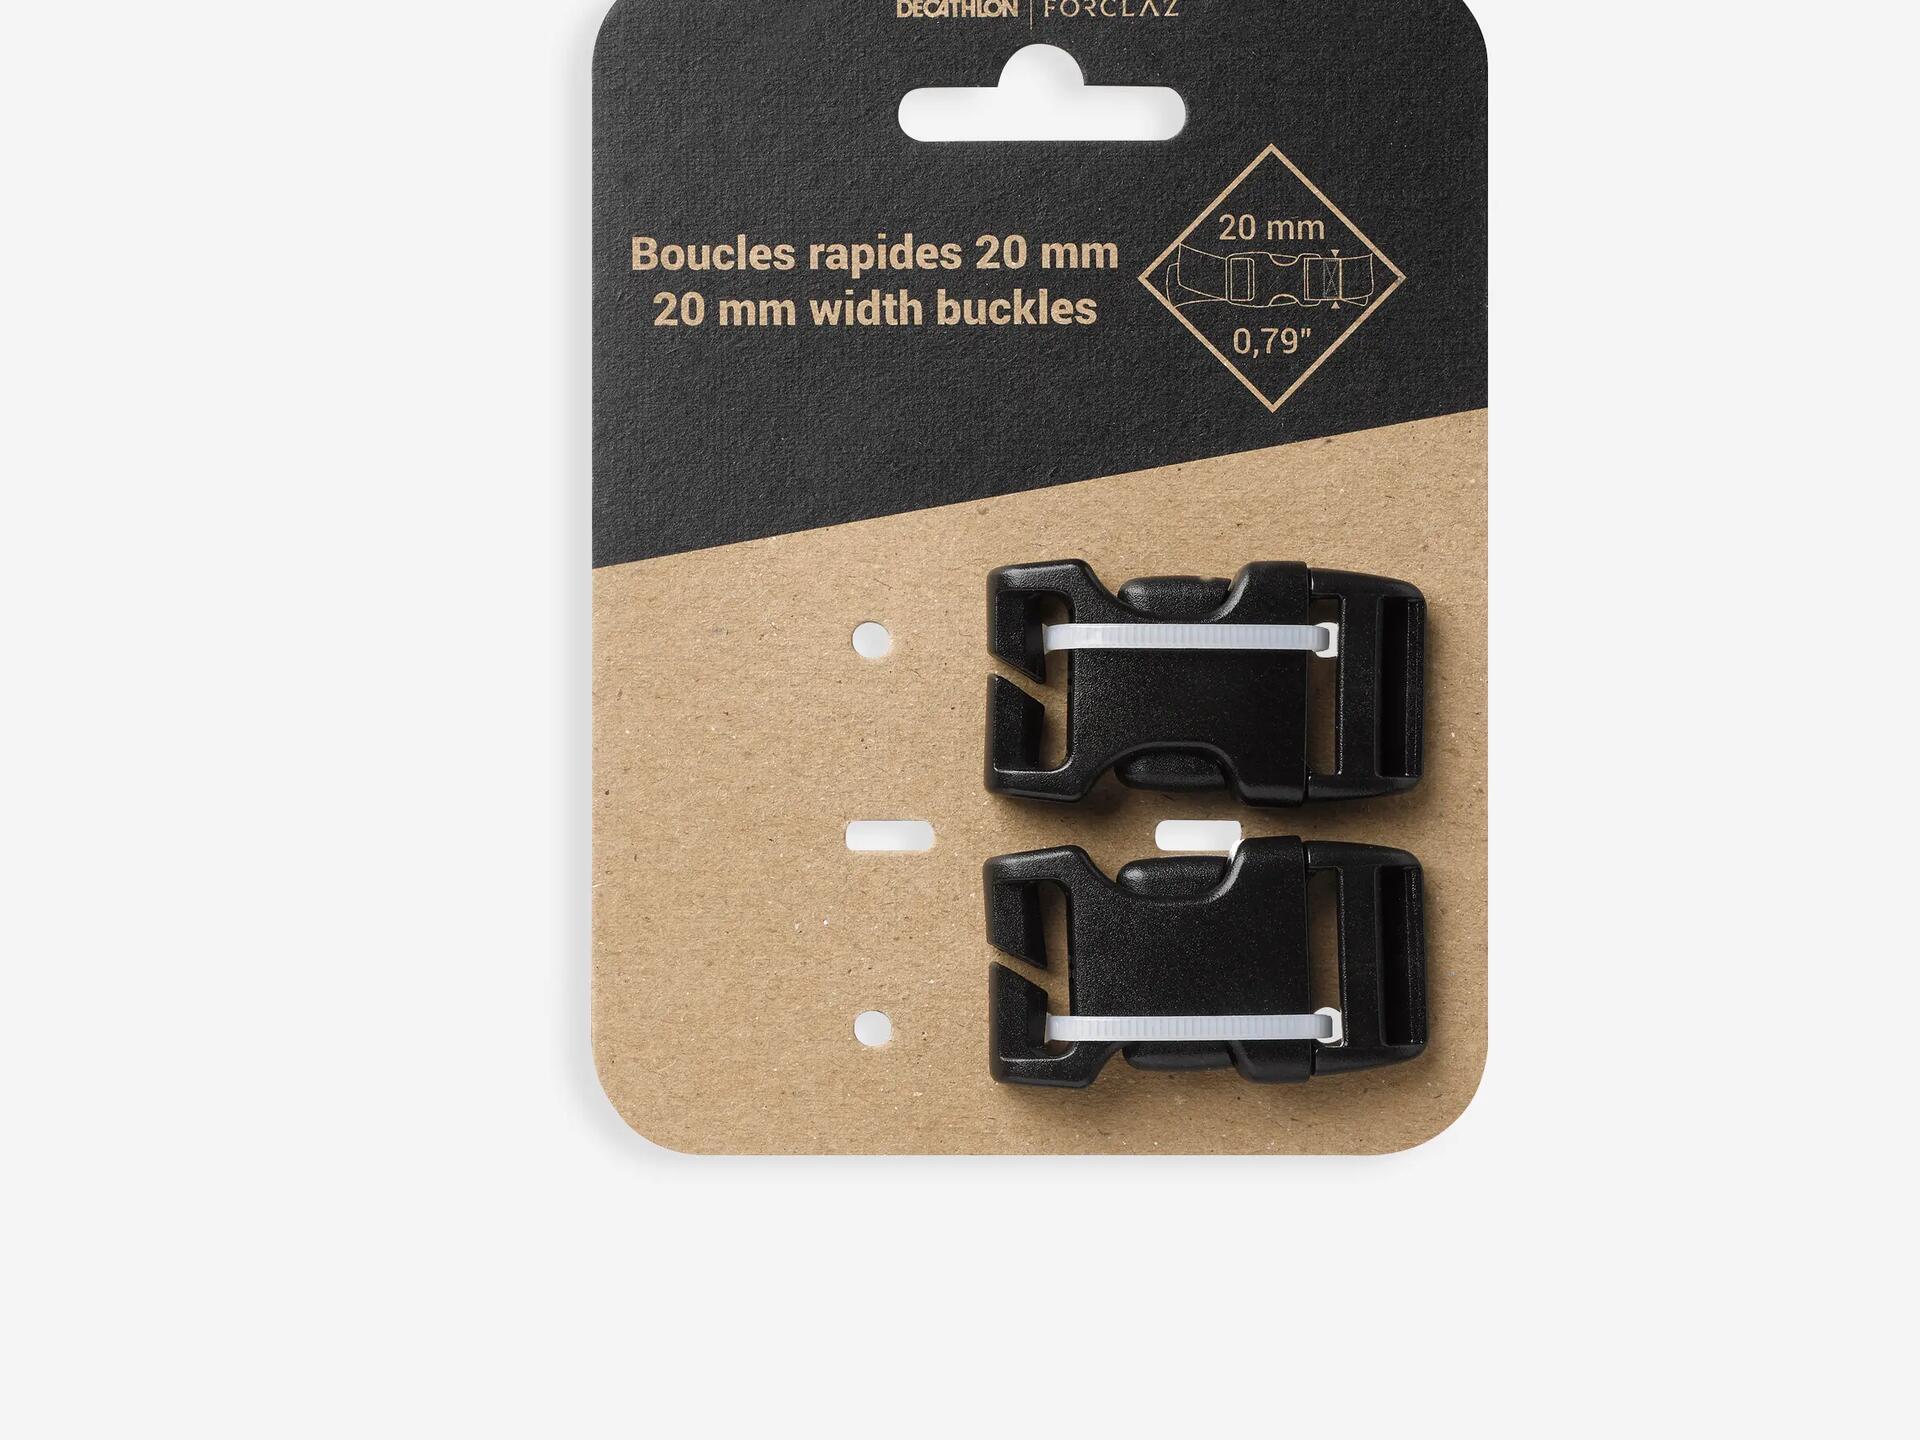 2 x 20 mm quick-release buckles backpack